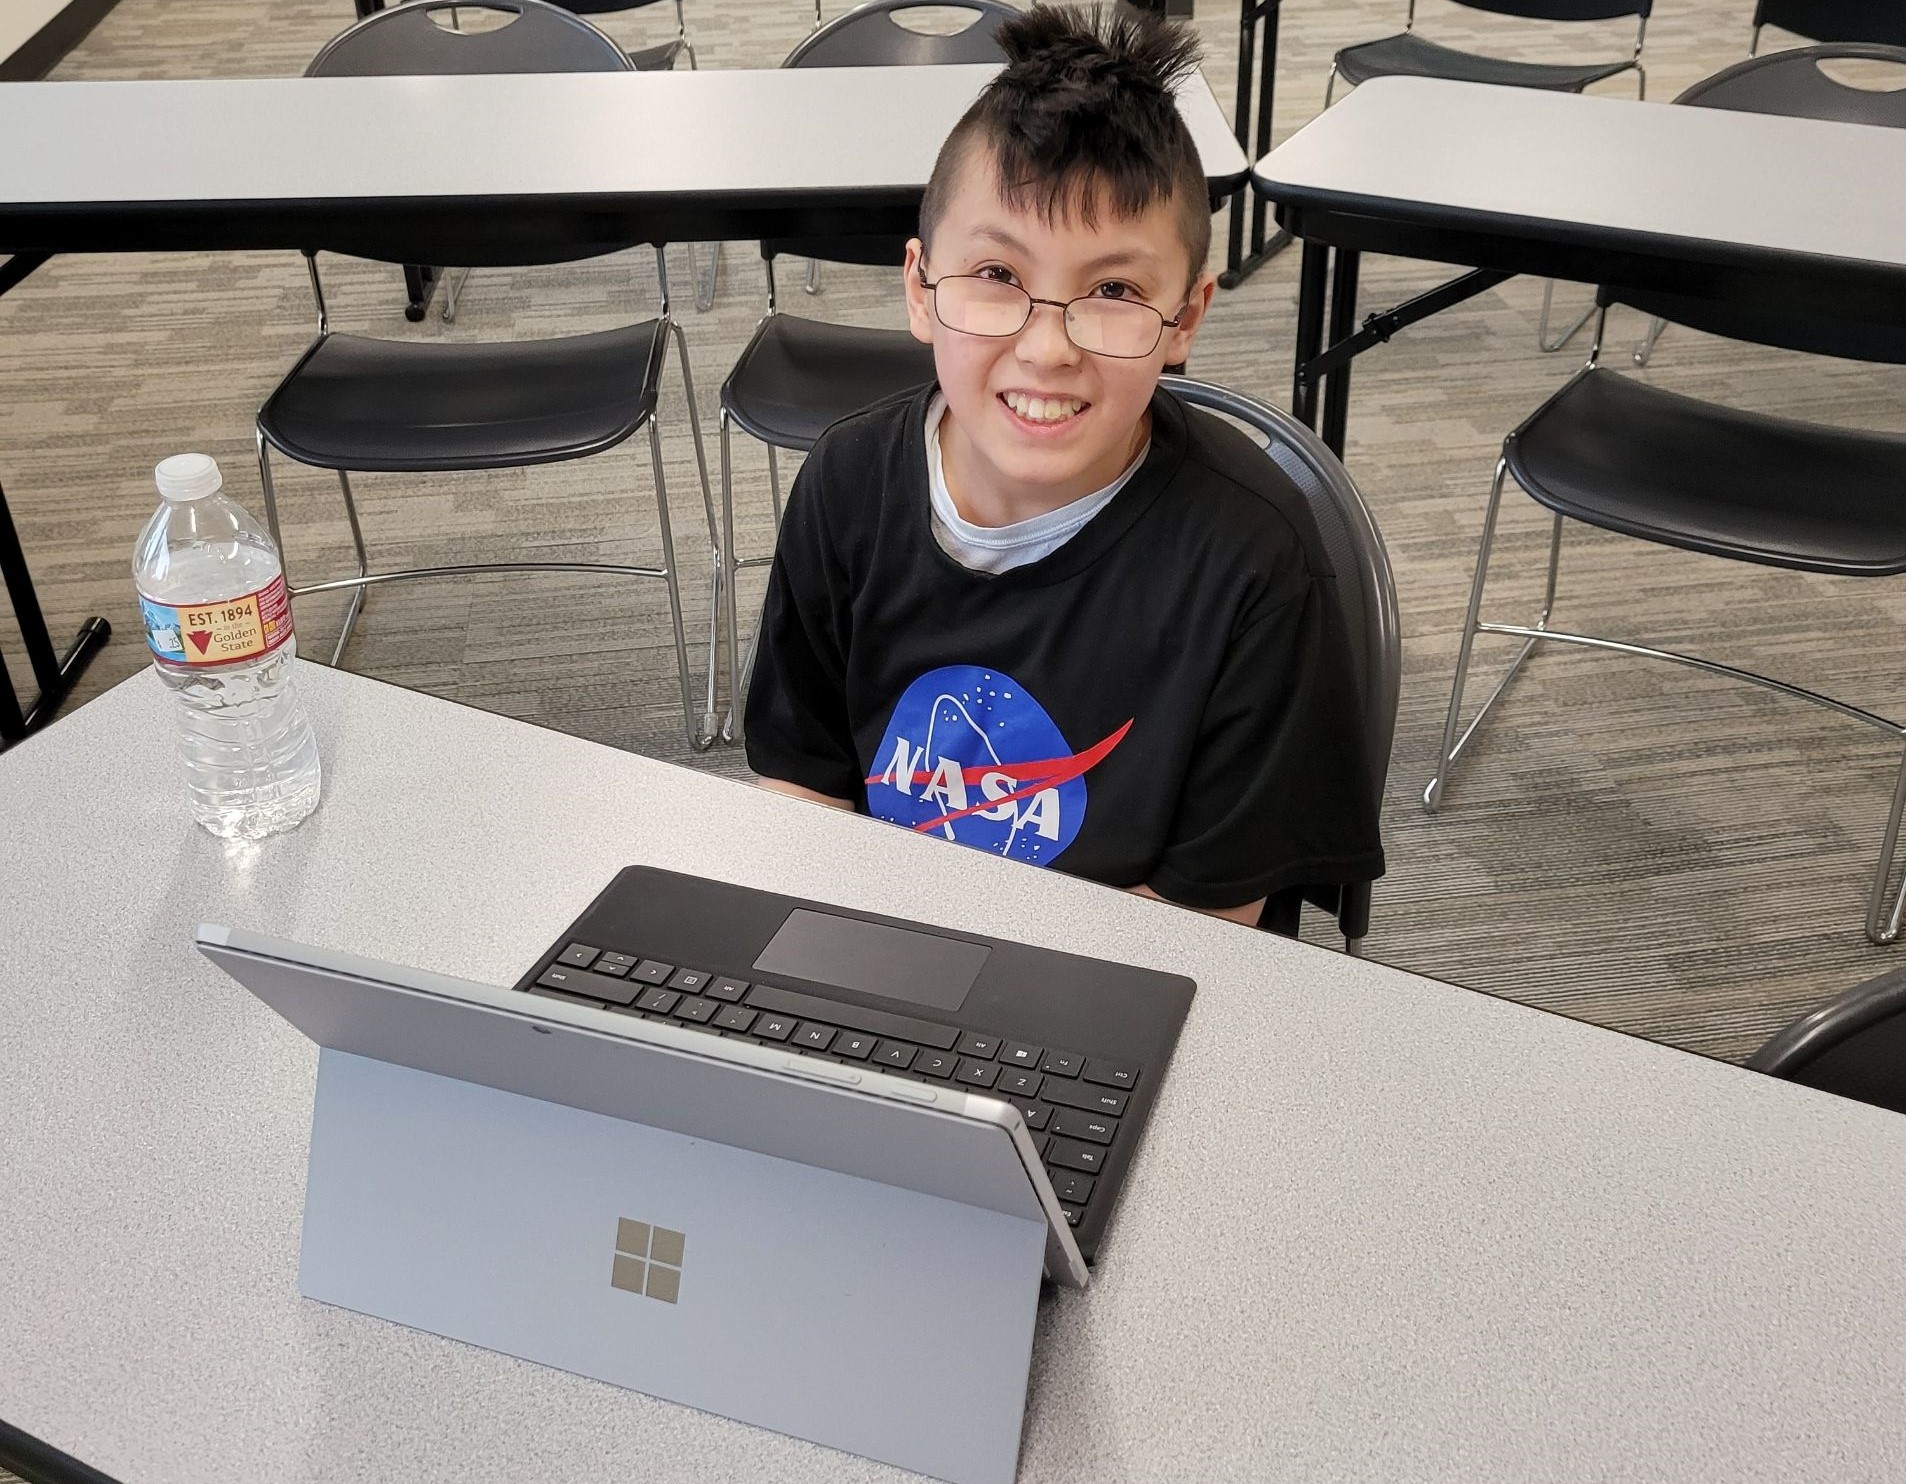 A student wearing a NASA shirt smiles at a desk with a laptop.